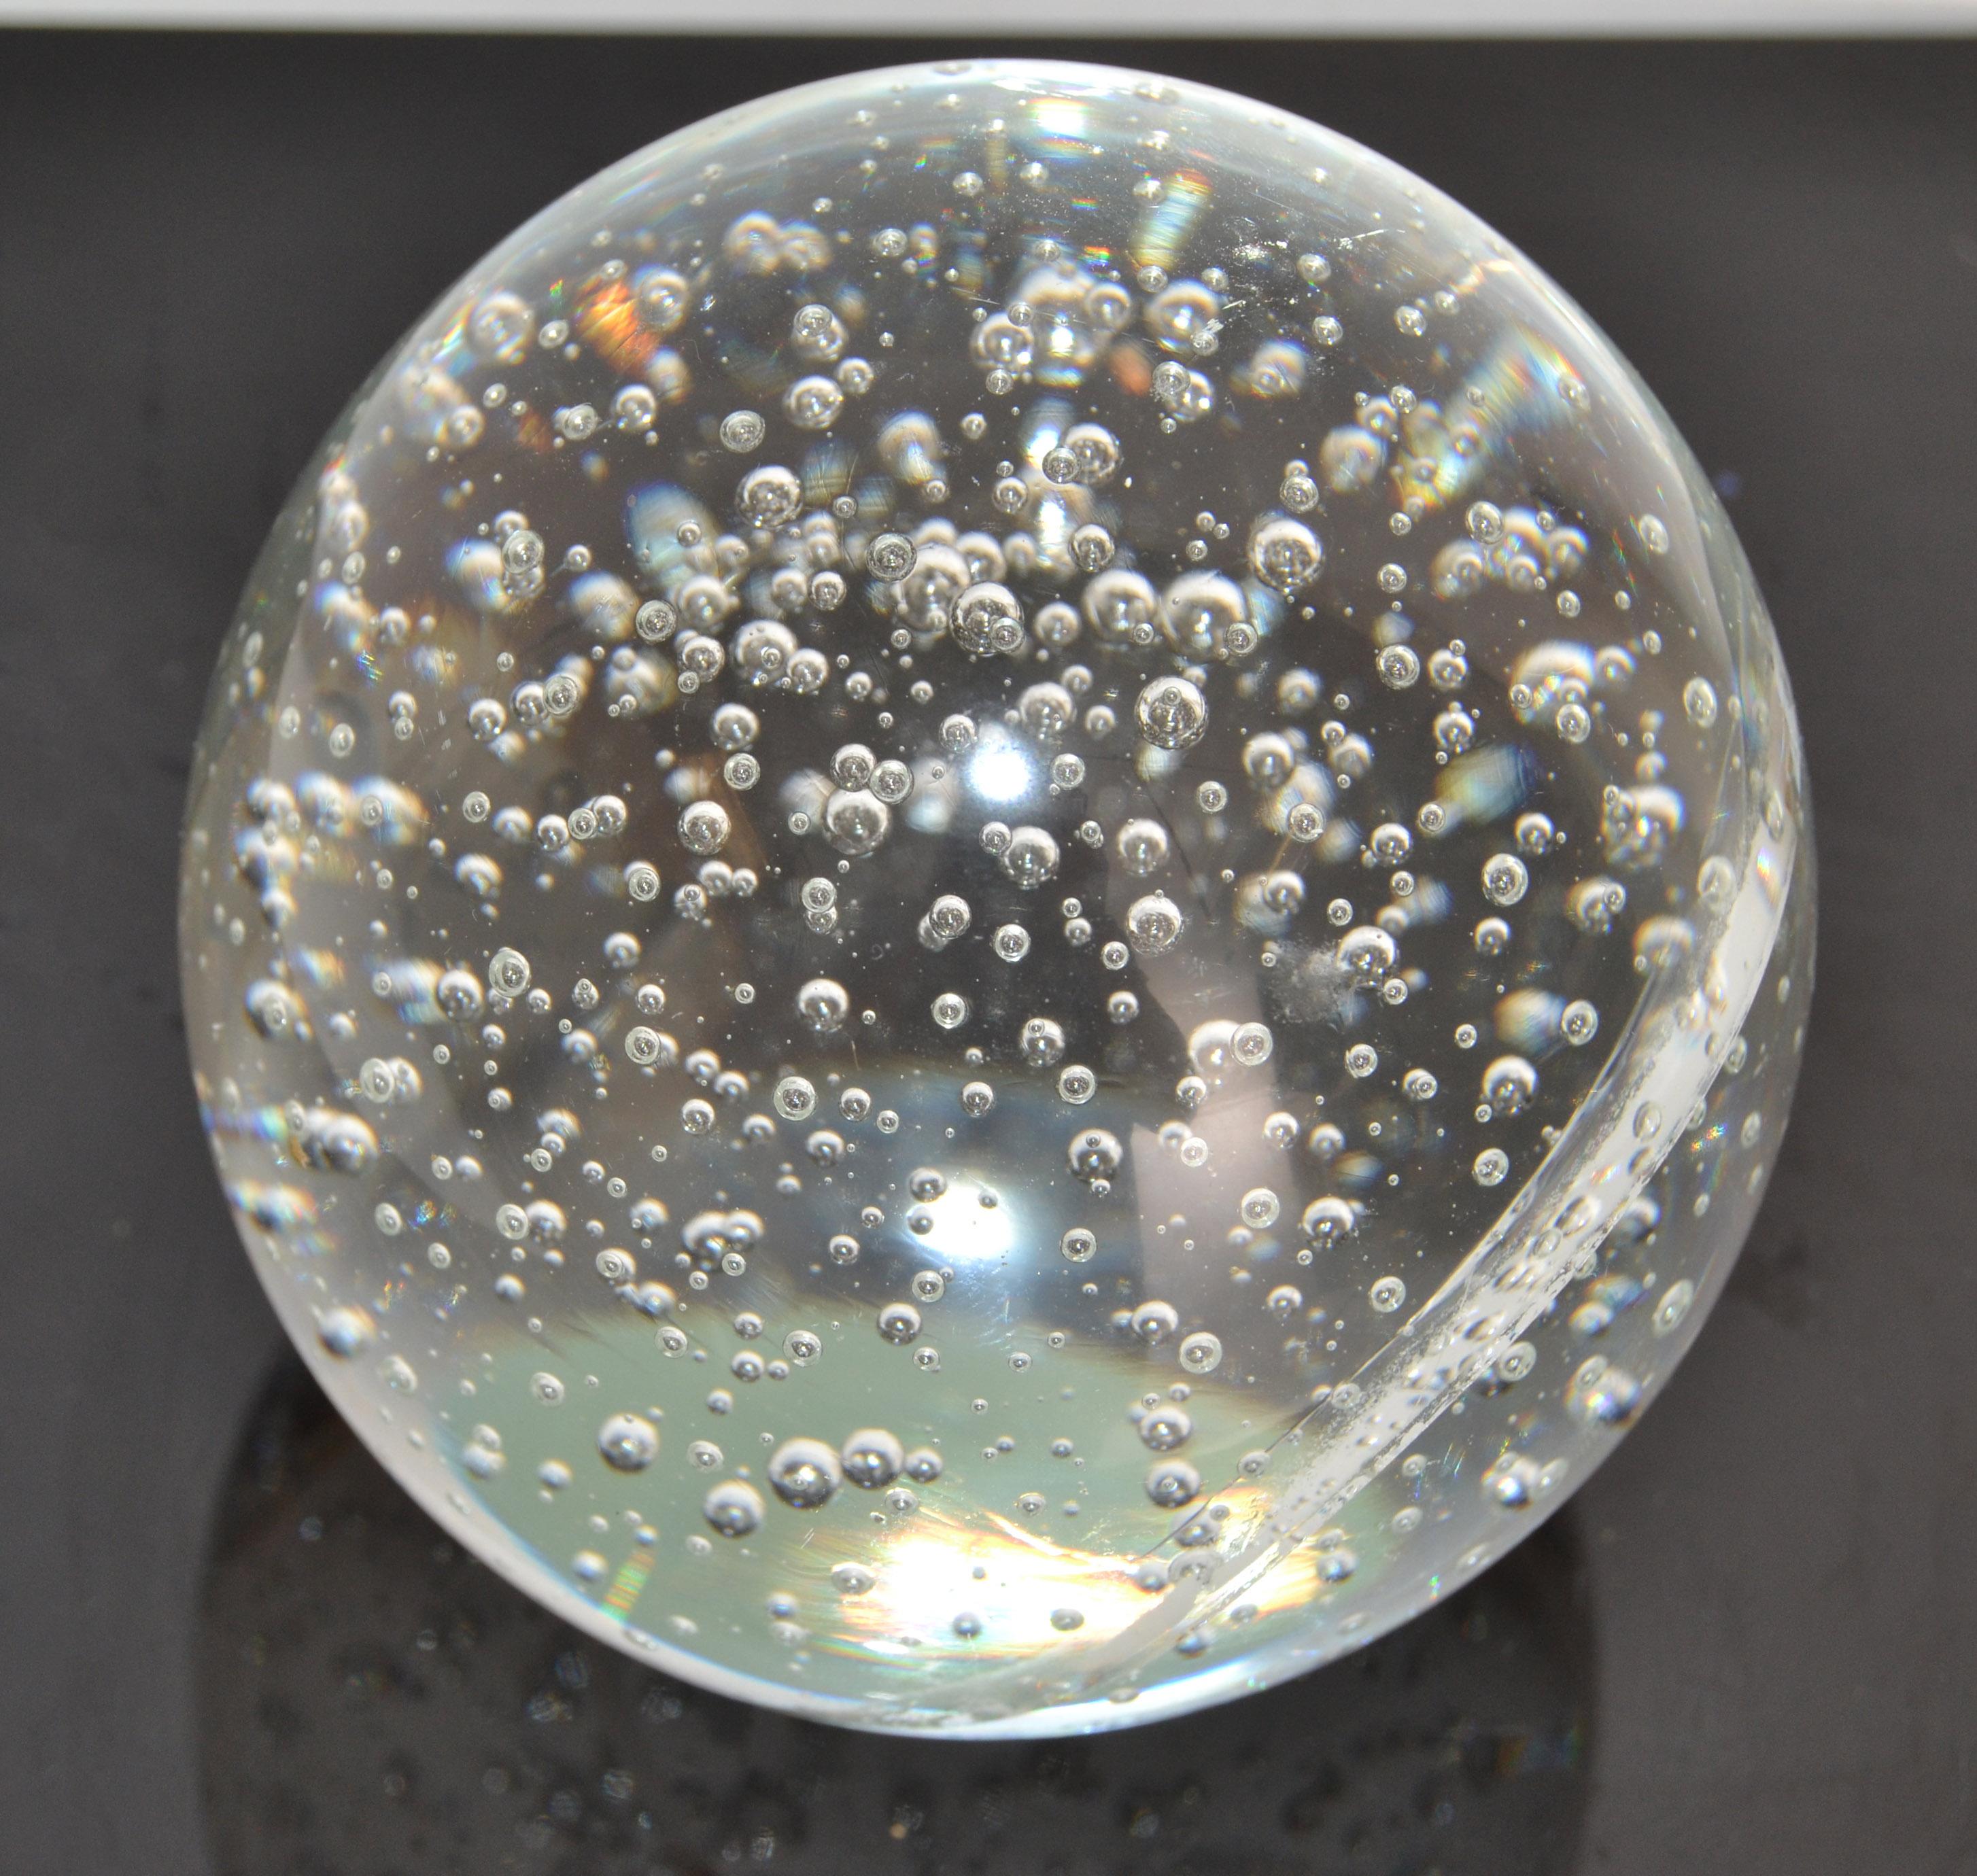 Mid-Century Modern Vintage blown controlled bubbles Murano Art Glass Transparent Paperweight made in Italy.
Great for a Desk as Paperweight, Sculpture or Office Accessory.
Collector's Item from the 1980s Era.
In good vintage condition with a line